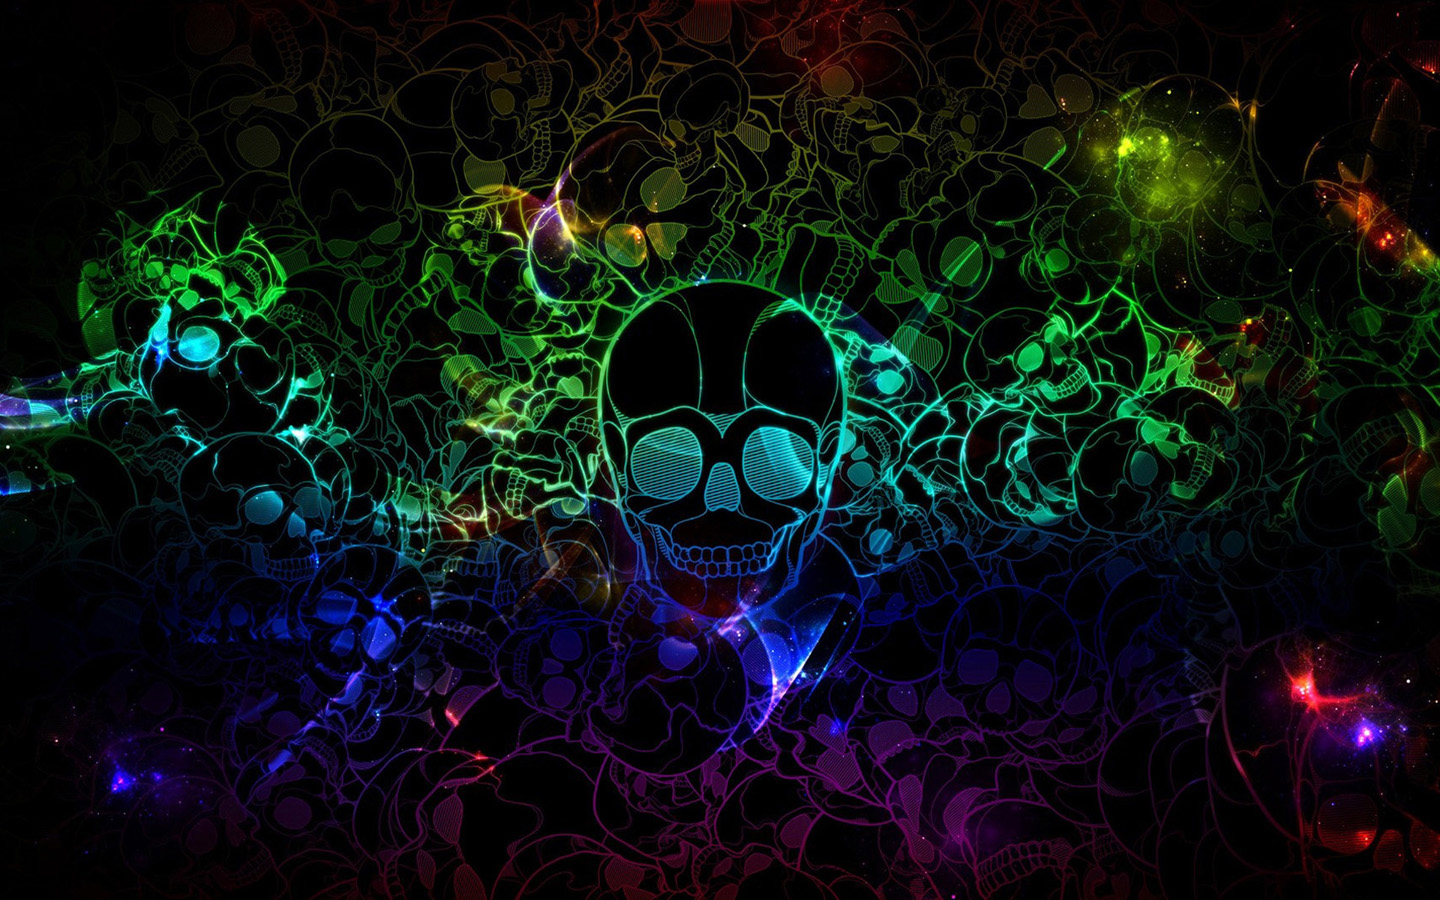 3d Skull Wallpaper 11 1440 X 900 Pixels Resolution, - Awesome Skull Backgrounds , HD Wallpaper & Backgrounds